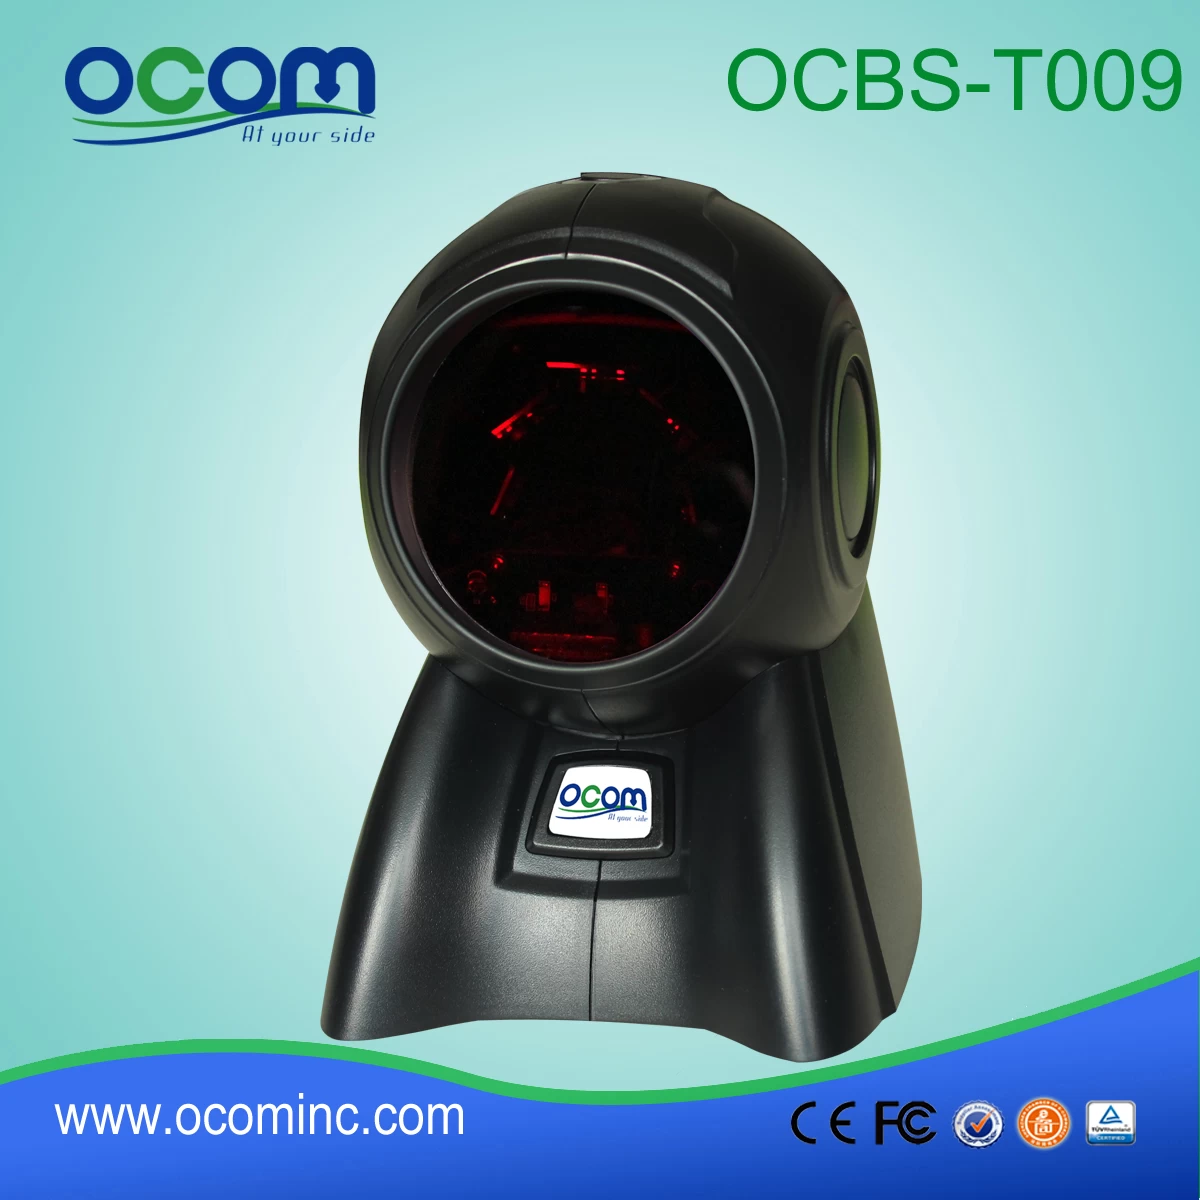 Fixed Mount Omini USB Laser Barcode Scanner (OCBS-T009)